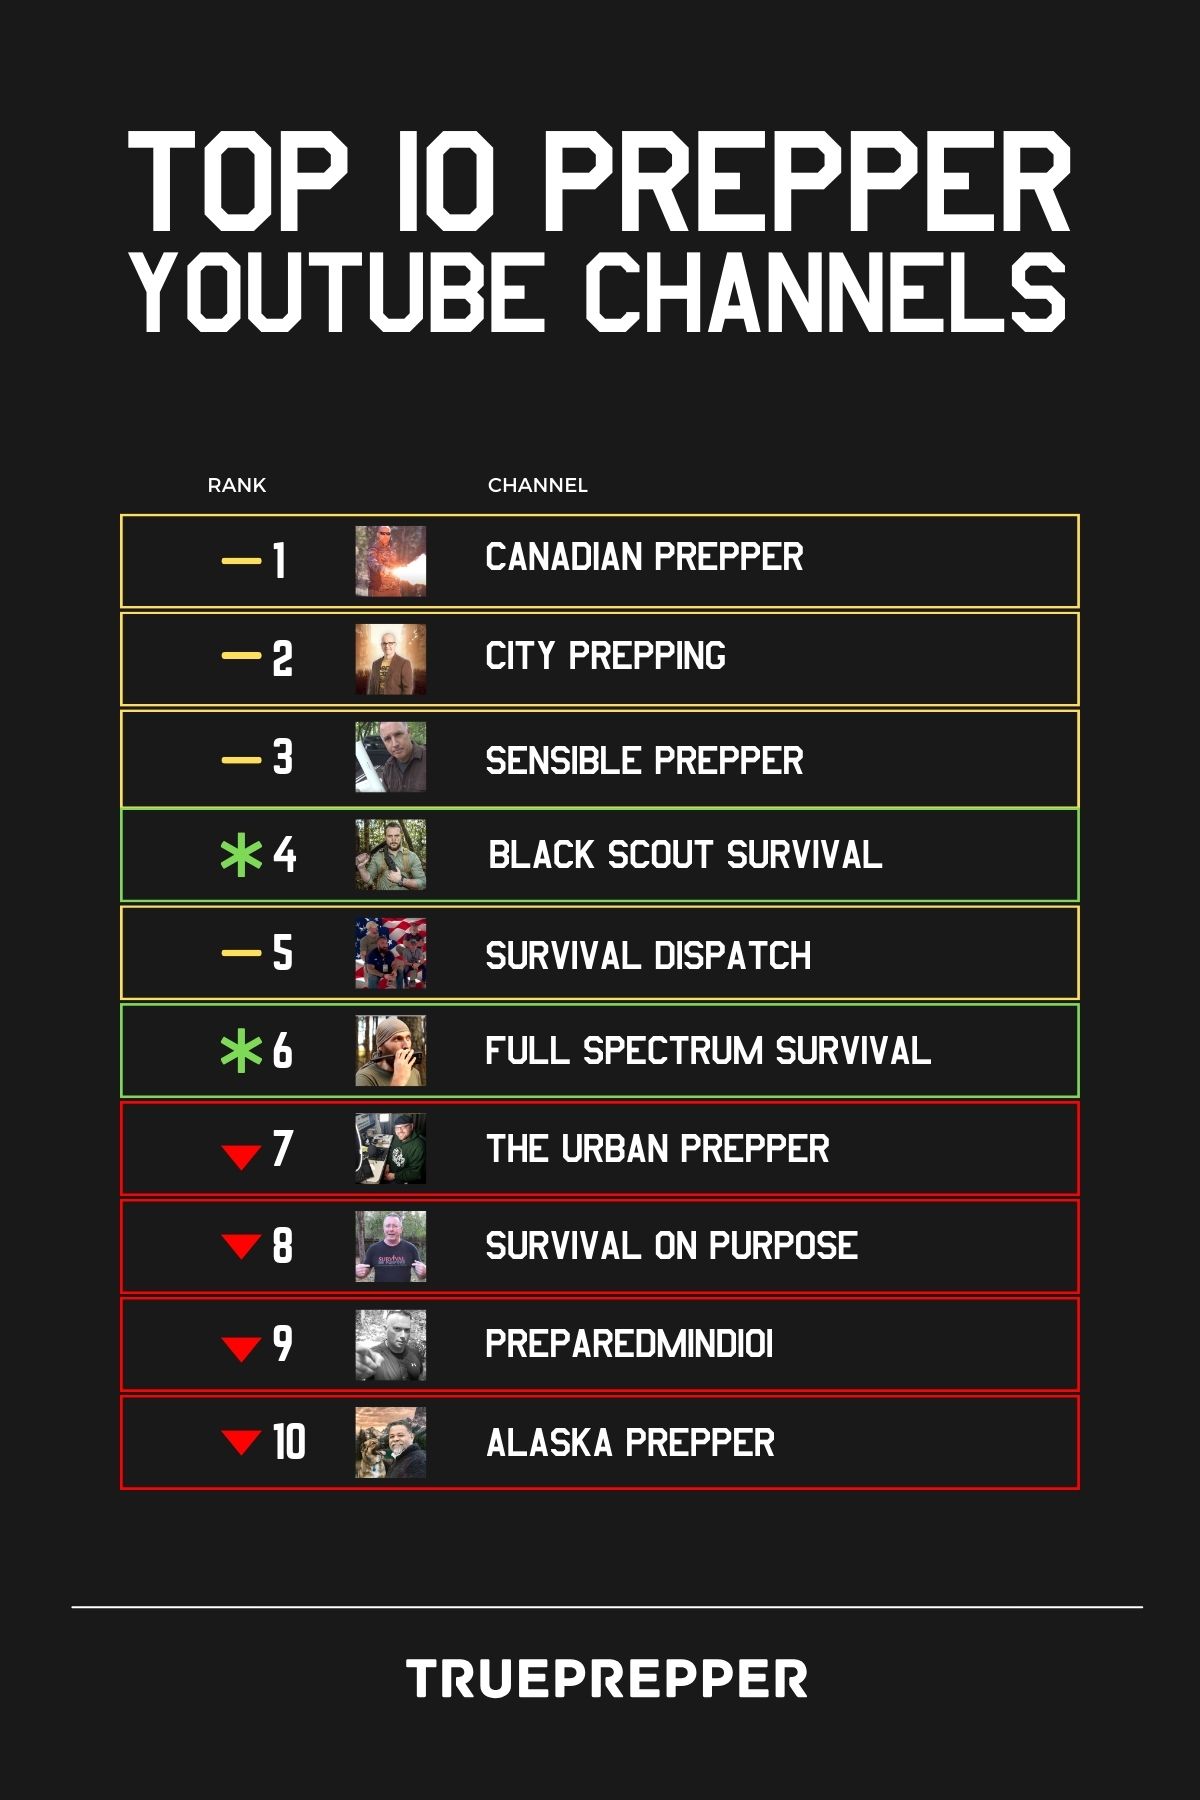 Top 10 Prepper YouTube Channels